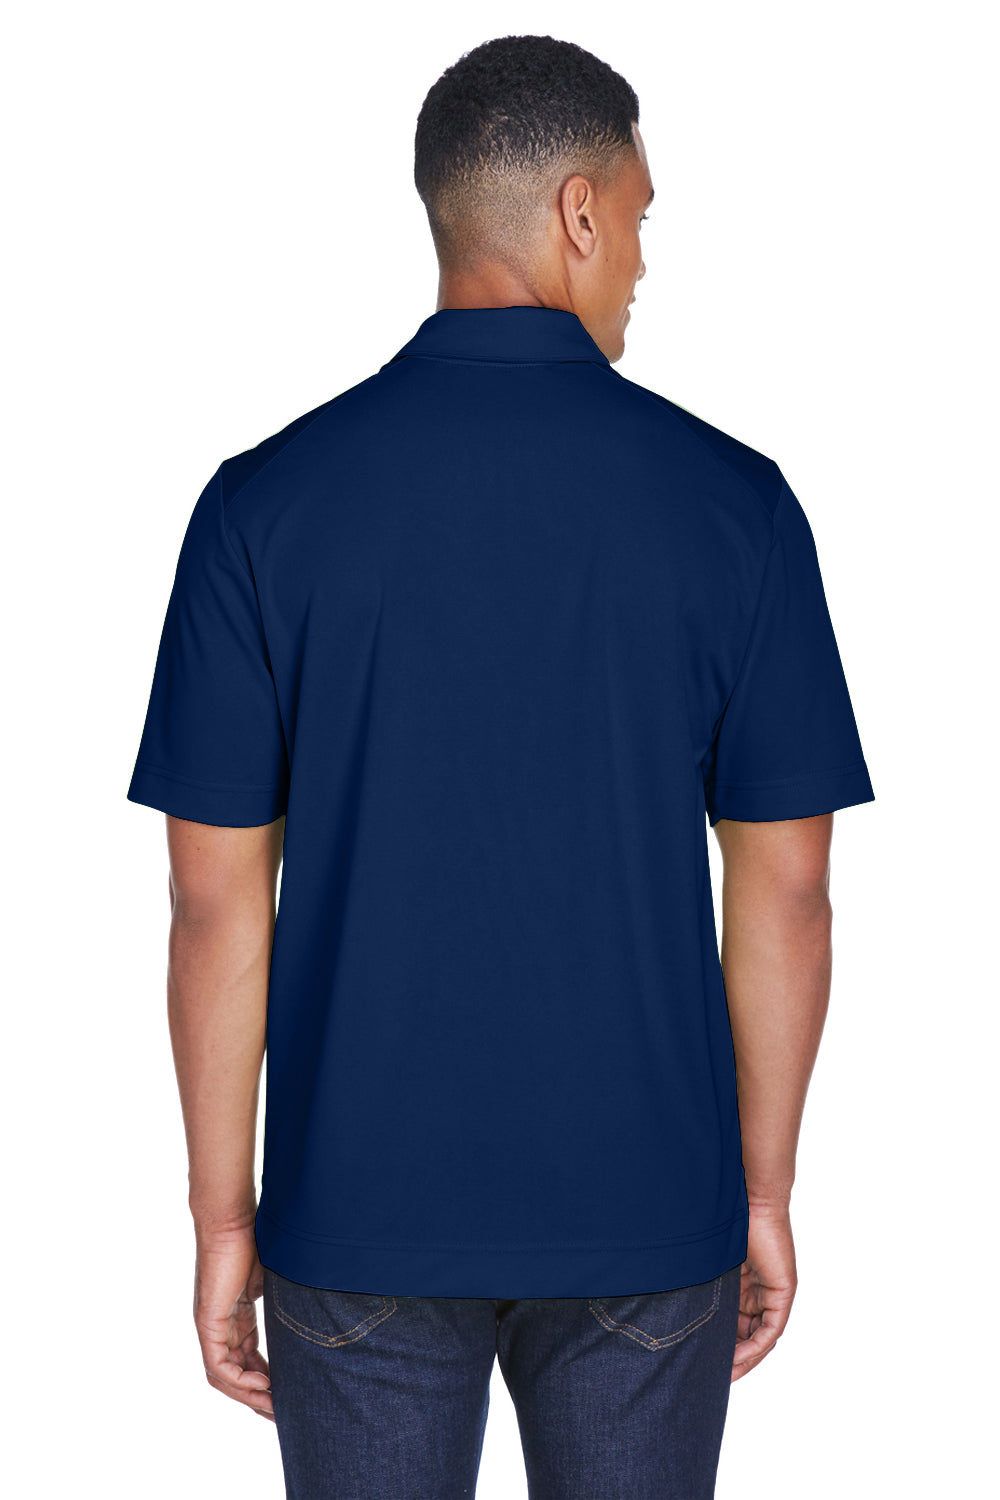 North End 88632 Mens Sport Red Performance Moisture Wicking Short Sleeve Polo Shirt Navy Blue Back